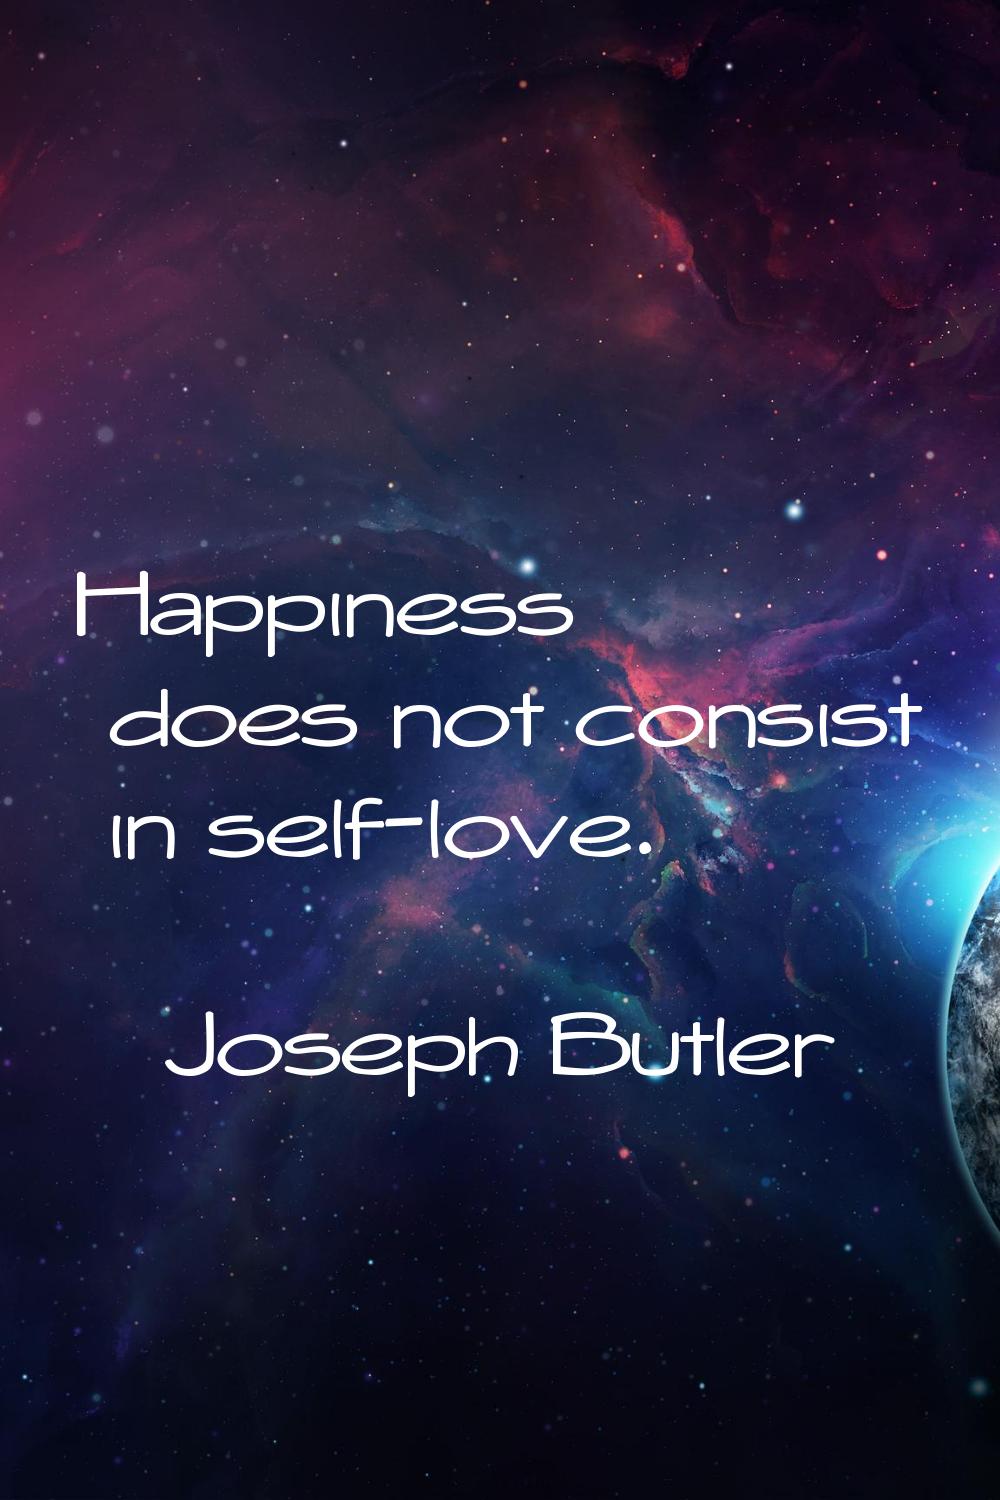 Happiness does not consist in self-love.